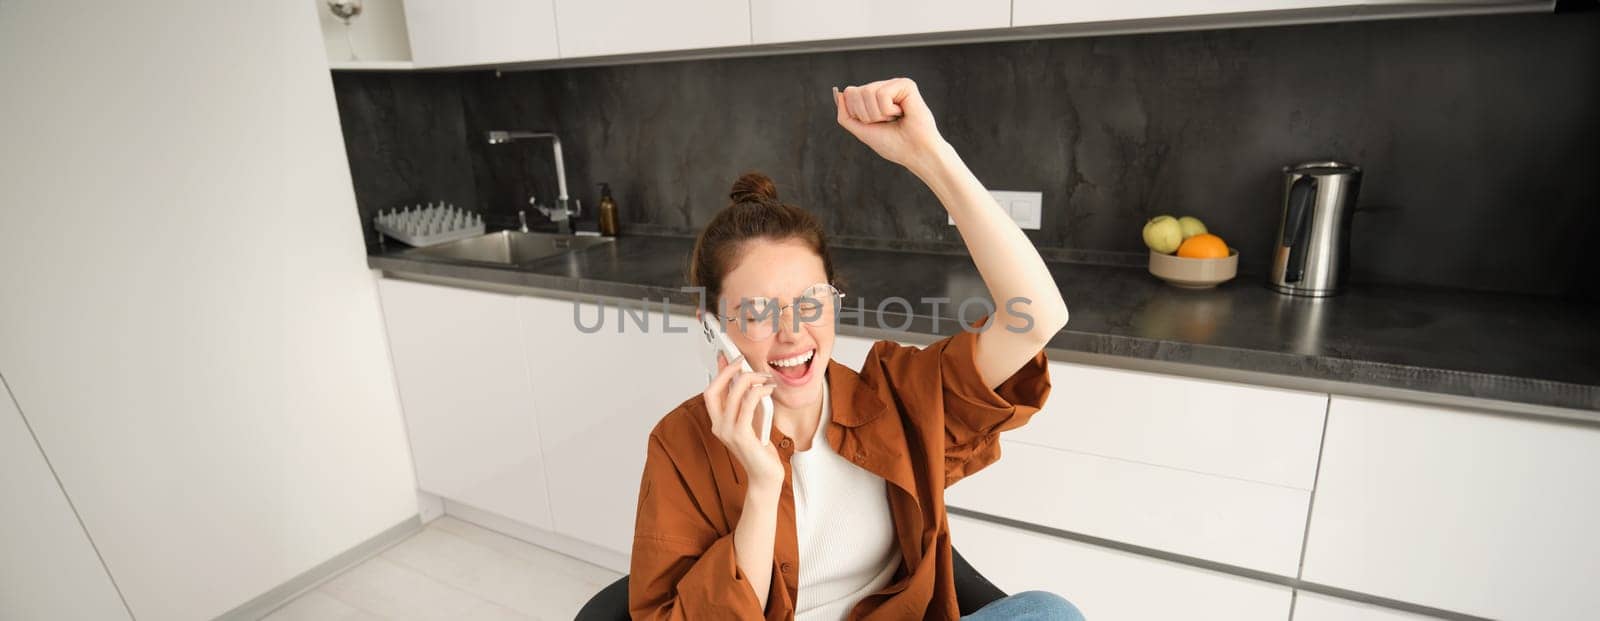 Portrait of woman receiving great news over the phone call, celebrates and jumps on chair from excitement during telephone conversation.